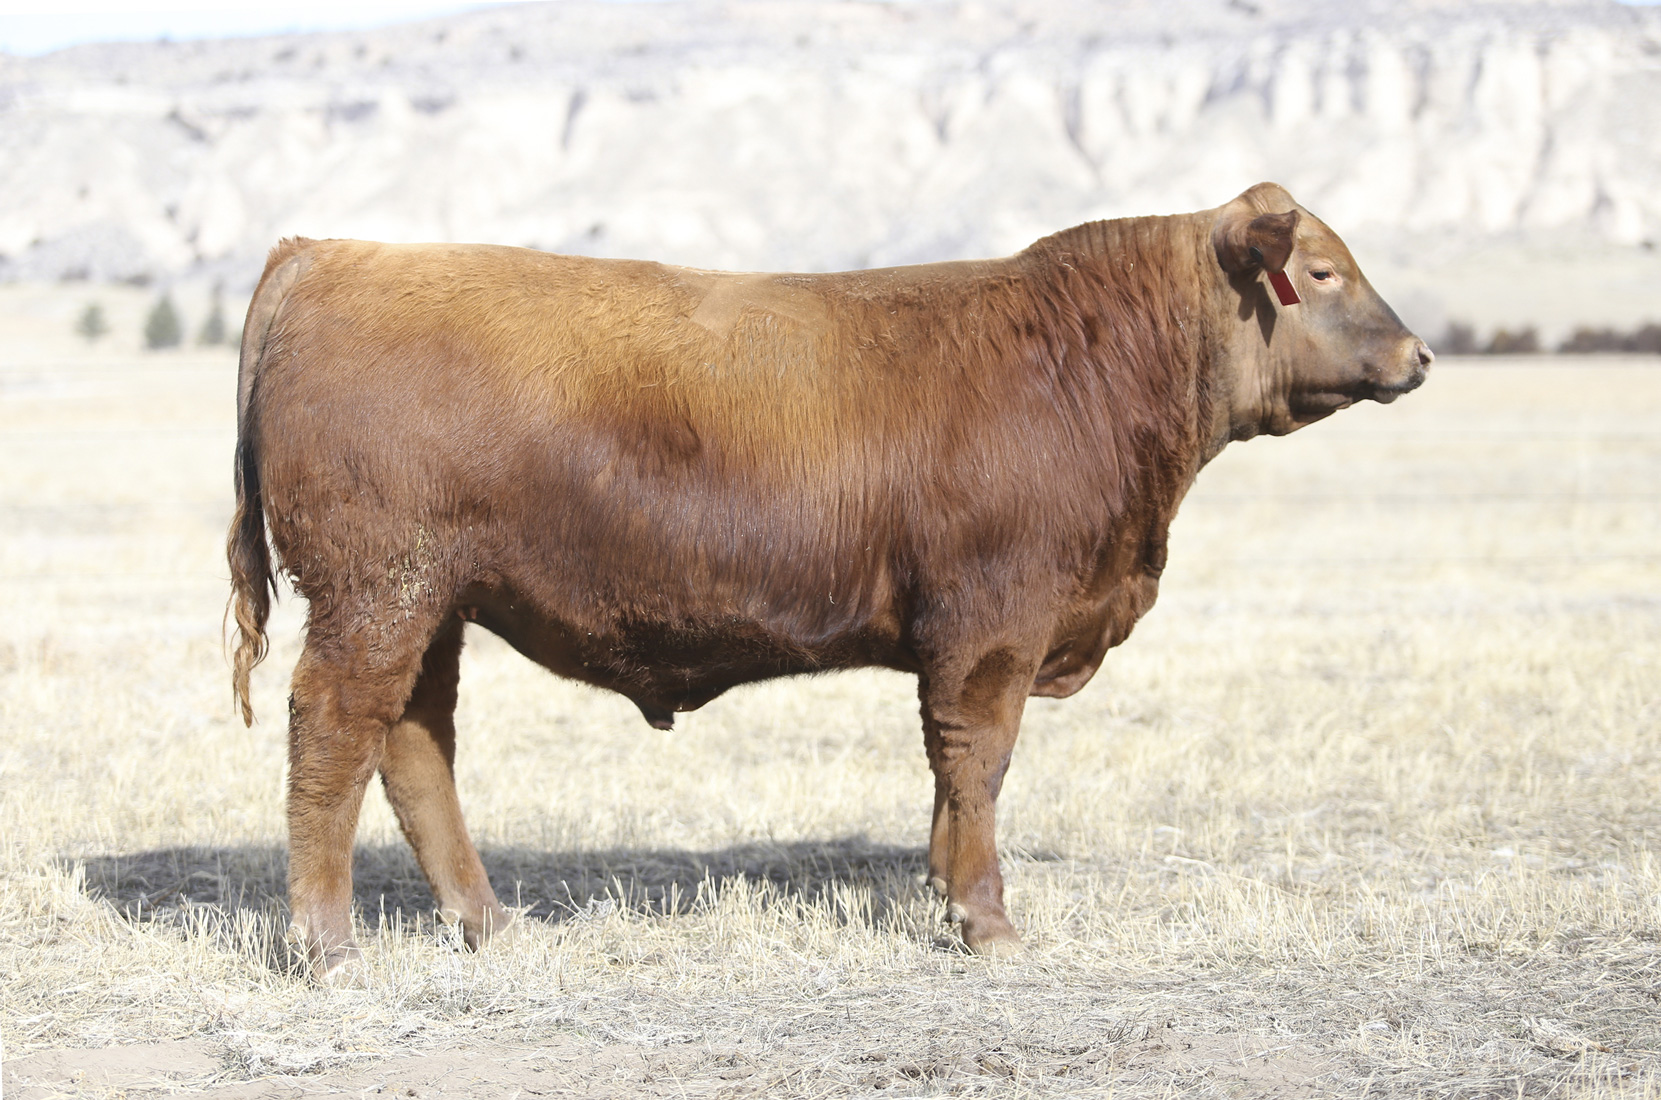   SCHULER RANCH HAND F606, son of Top Hand  